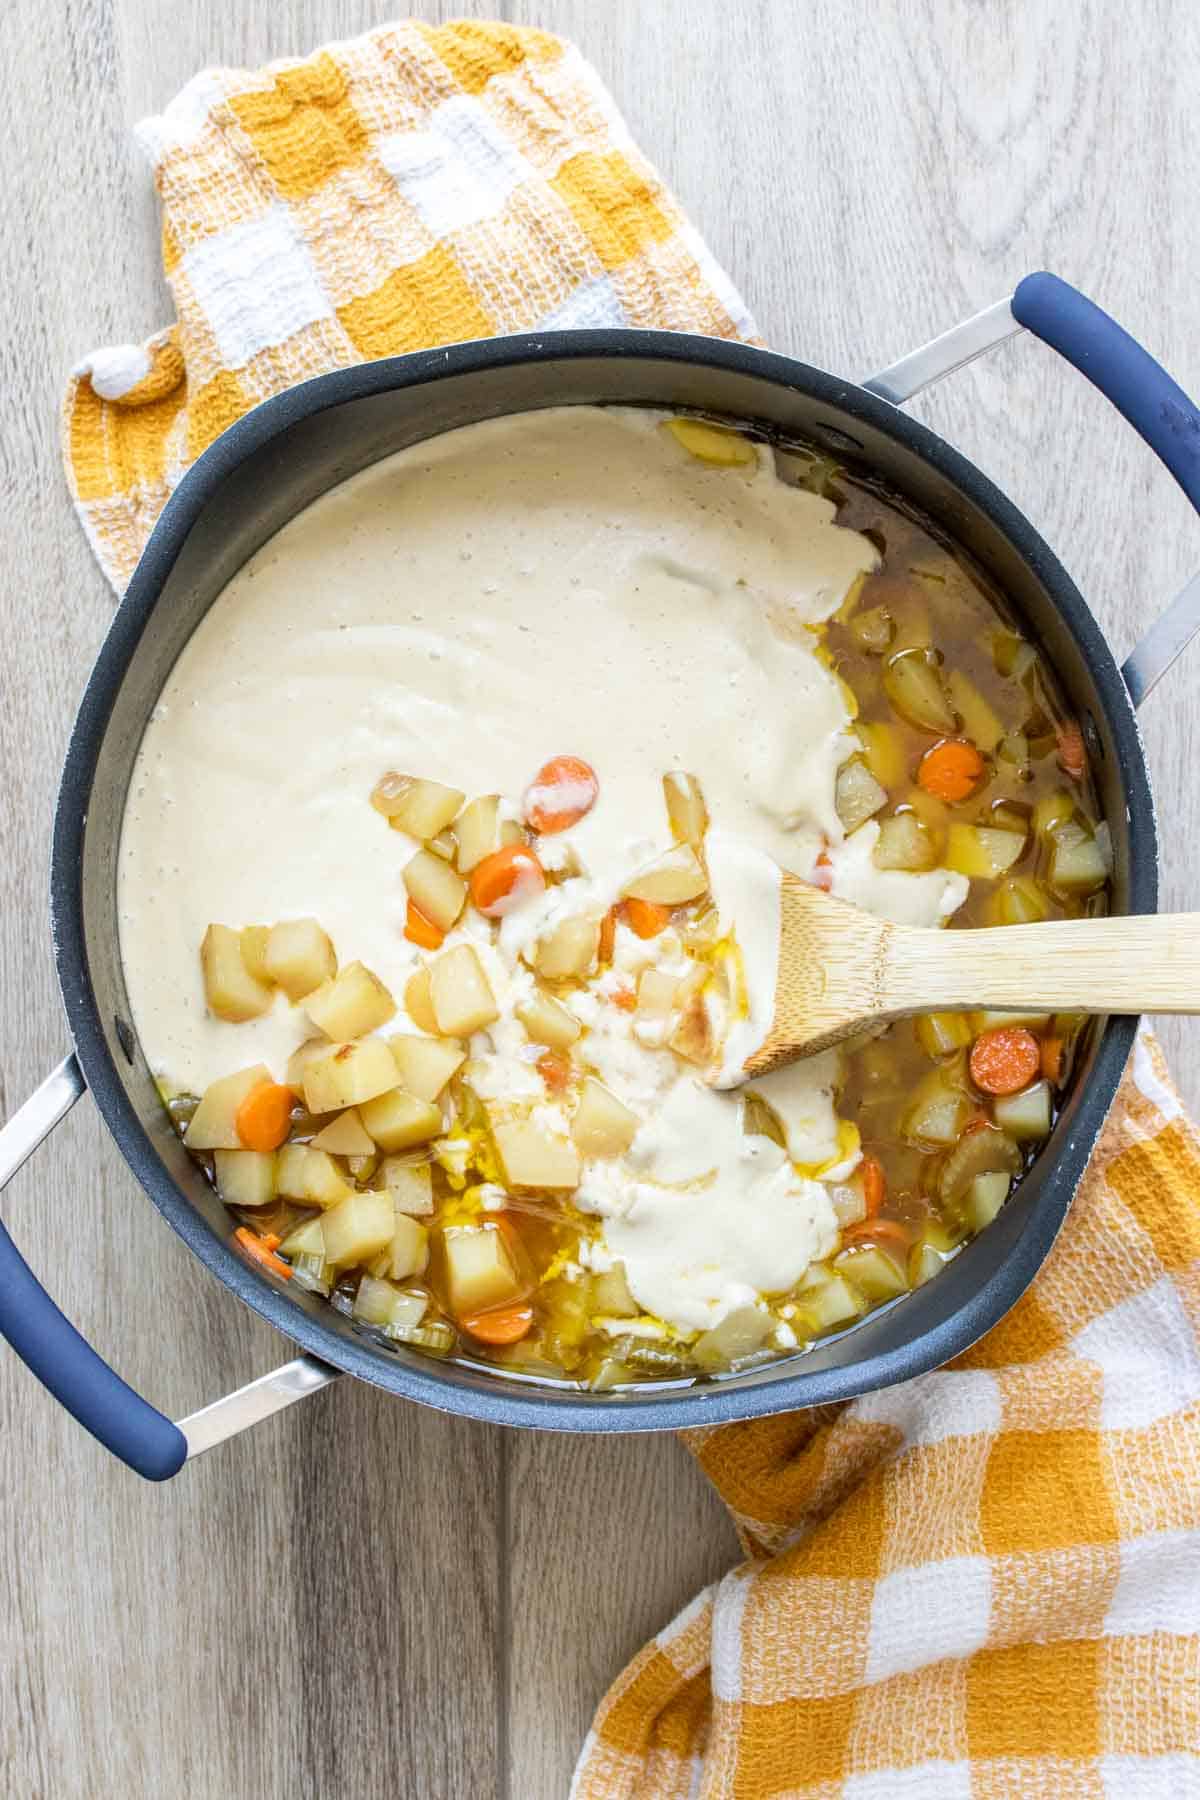 Wooden spoon mixing cream into a bowl of broth with veggies